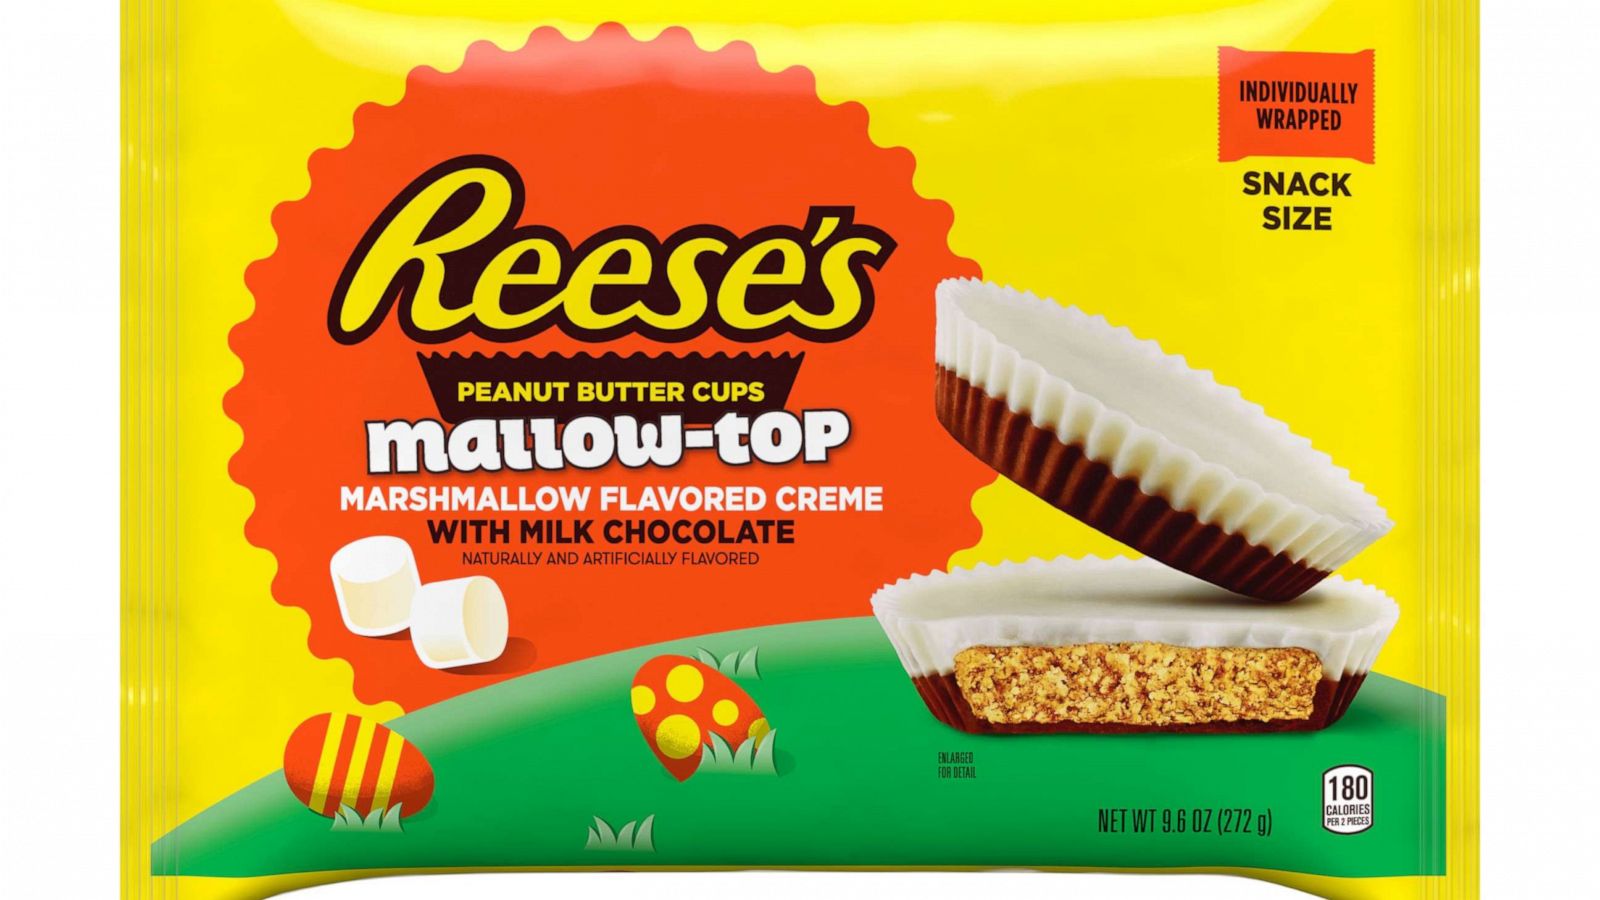 Hershey's unveils new 2021 seasonal sweets, including marshmallow